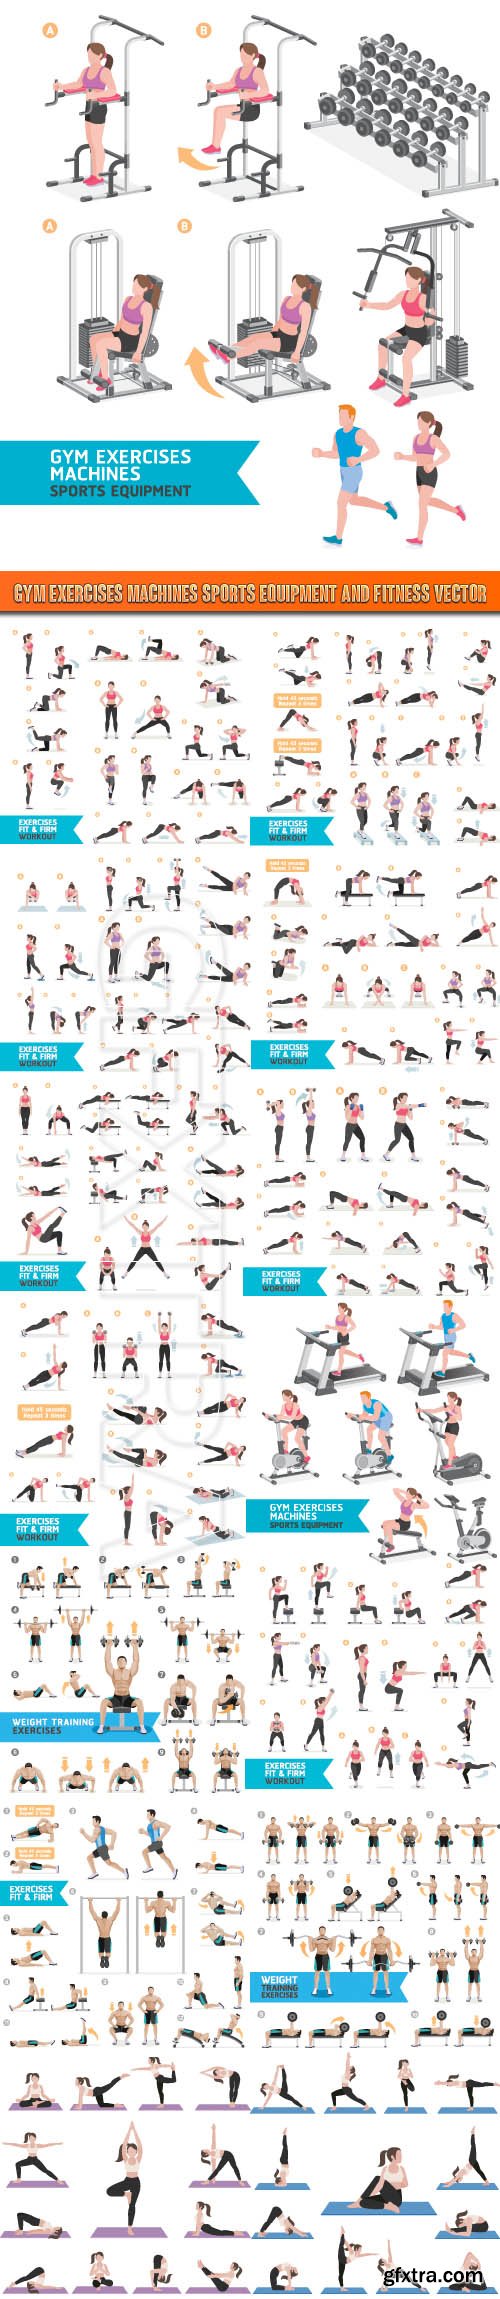 Gym exercises machines sports equipment and fitness vector